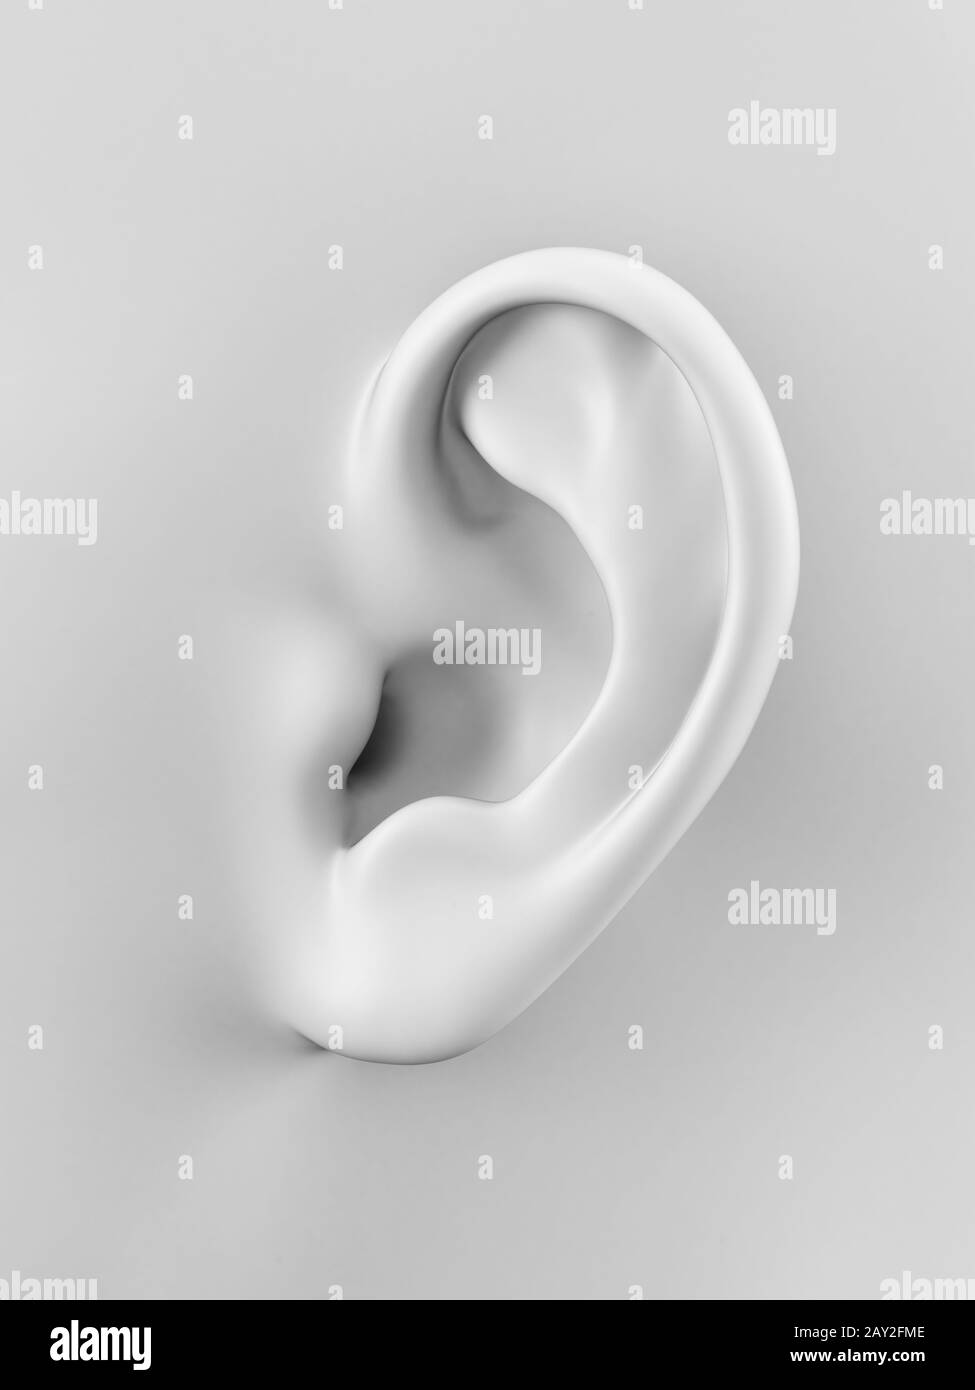 3d rendered illustration of a human ear Stock Photo